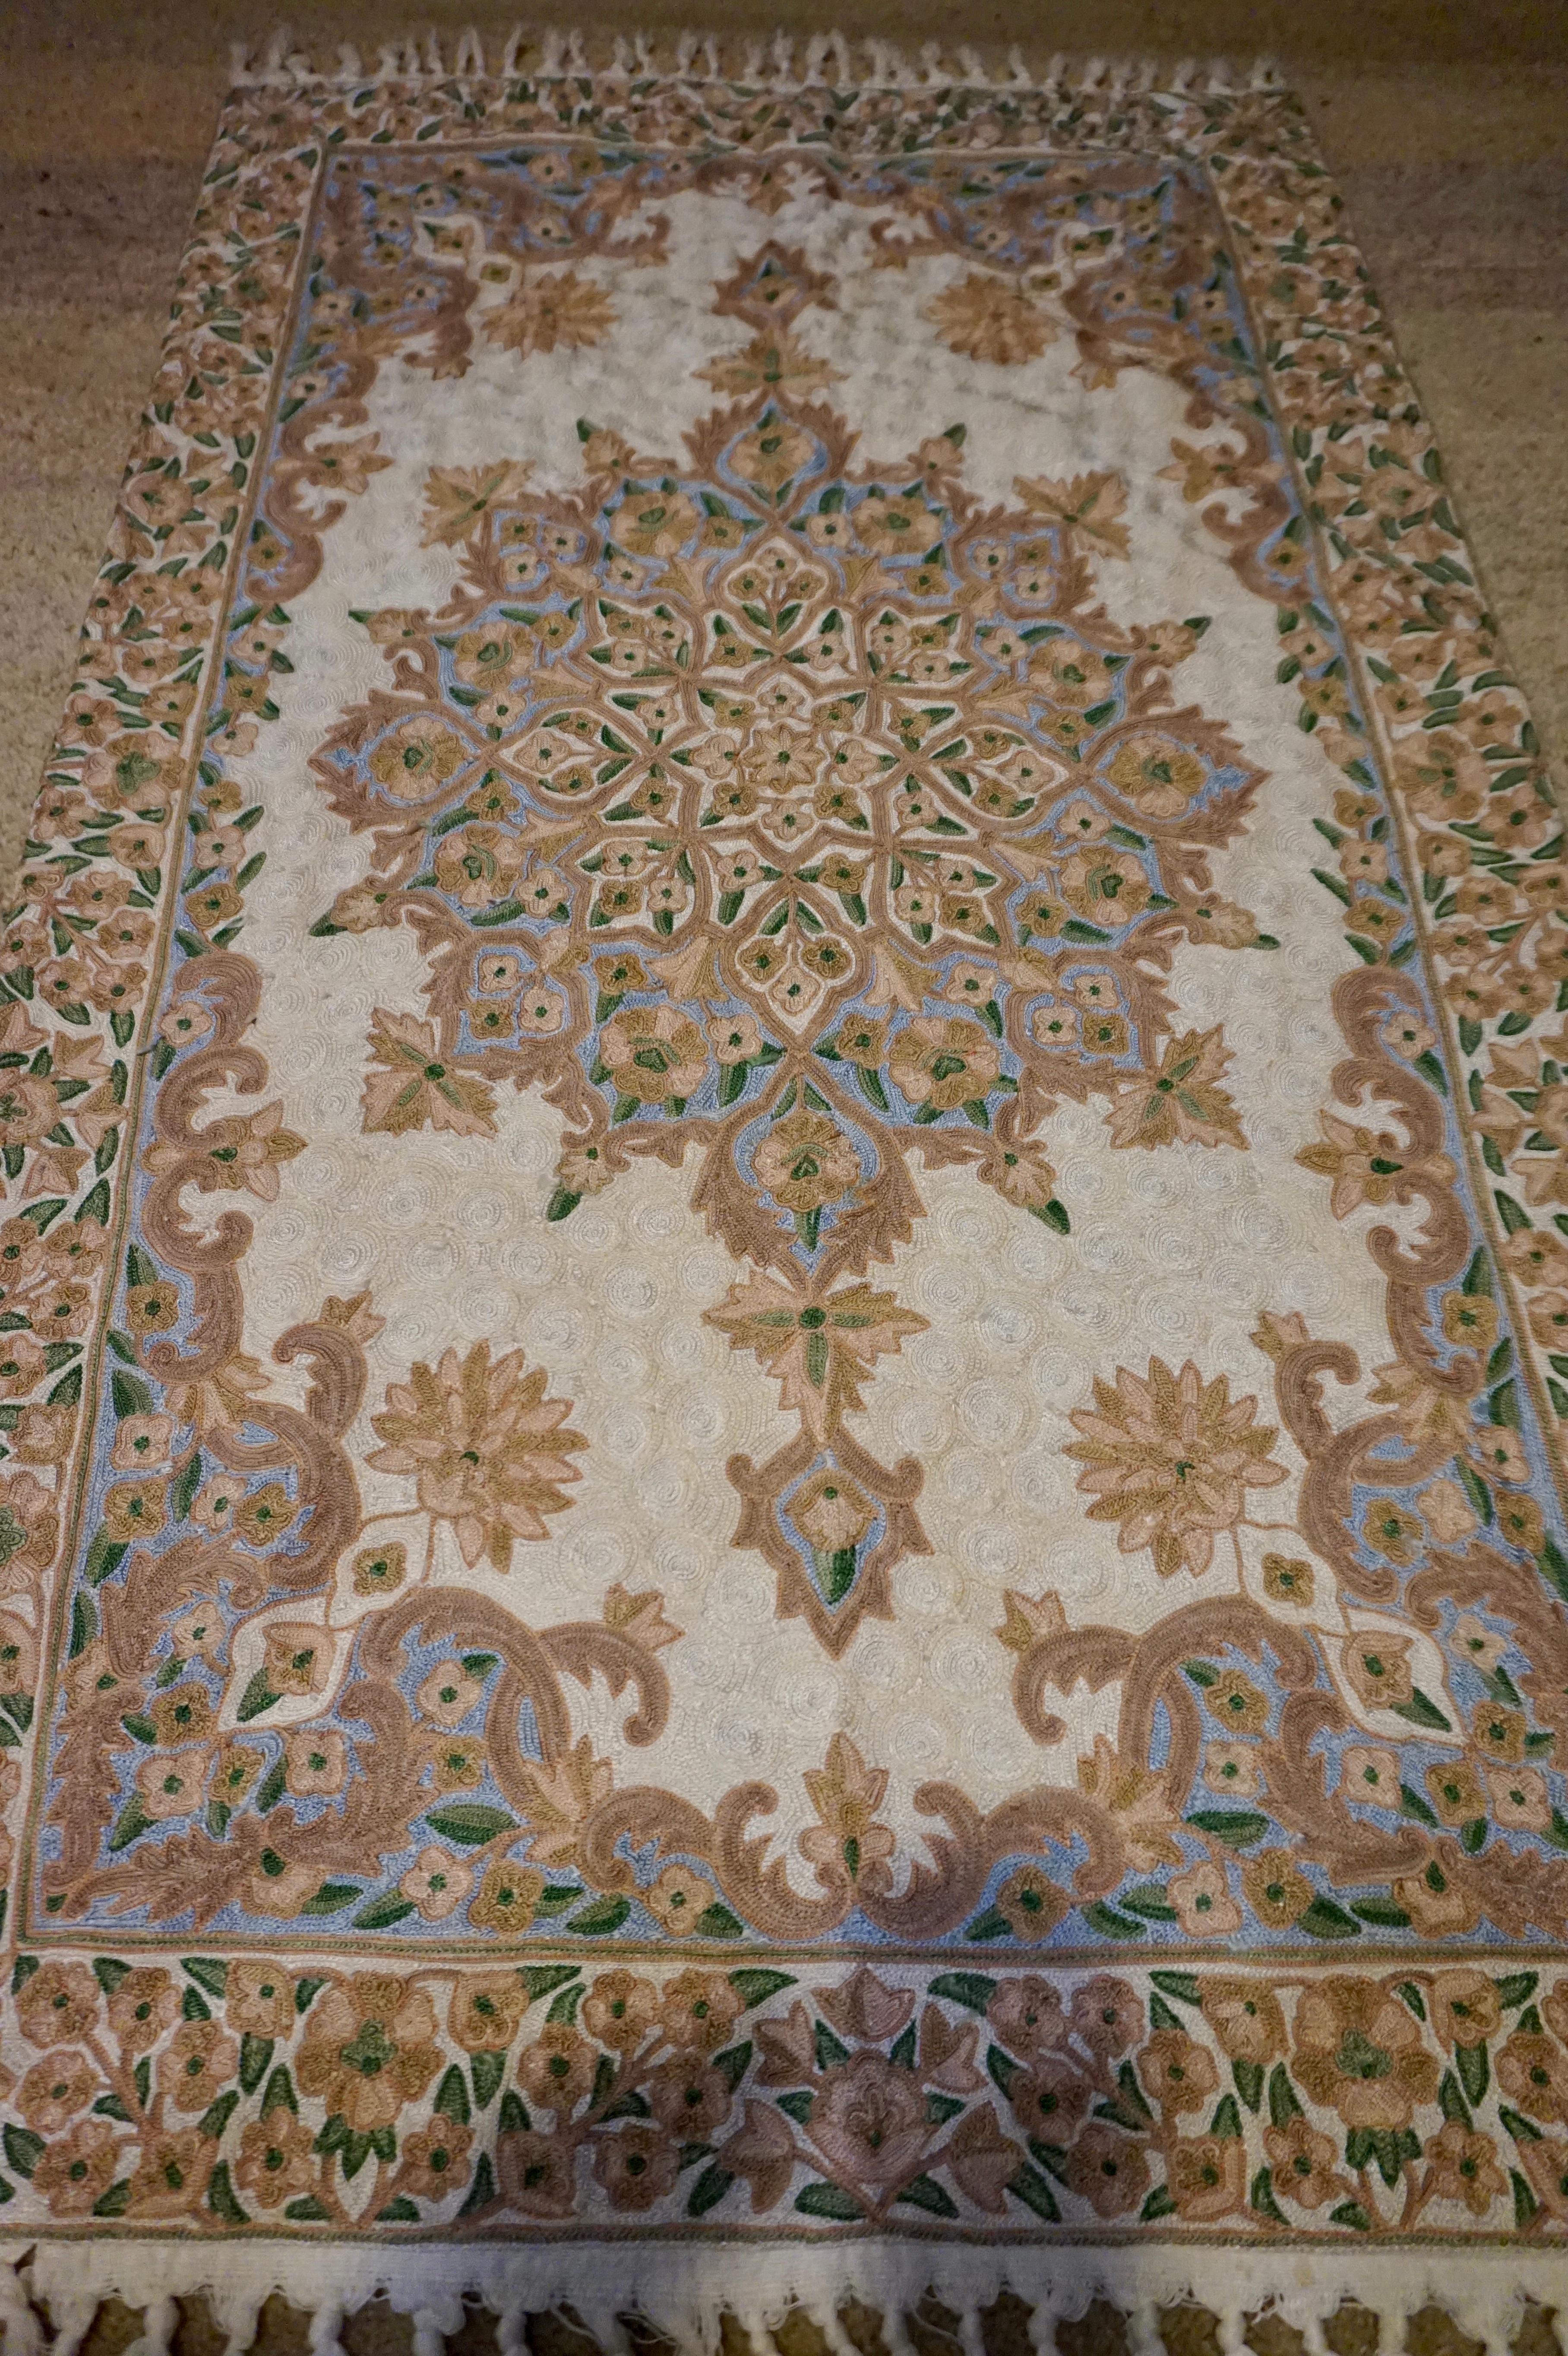 Silk on cotton superfine chain stitch embroidery rug/tapestry. Subtle soft hues and beautiful mosaic pattern. Canvas backed. Handmade. This quality is rarely seen today and is a reminder of their once thriving weaving heritage,

circa 1960s.